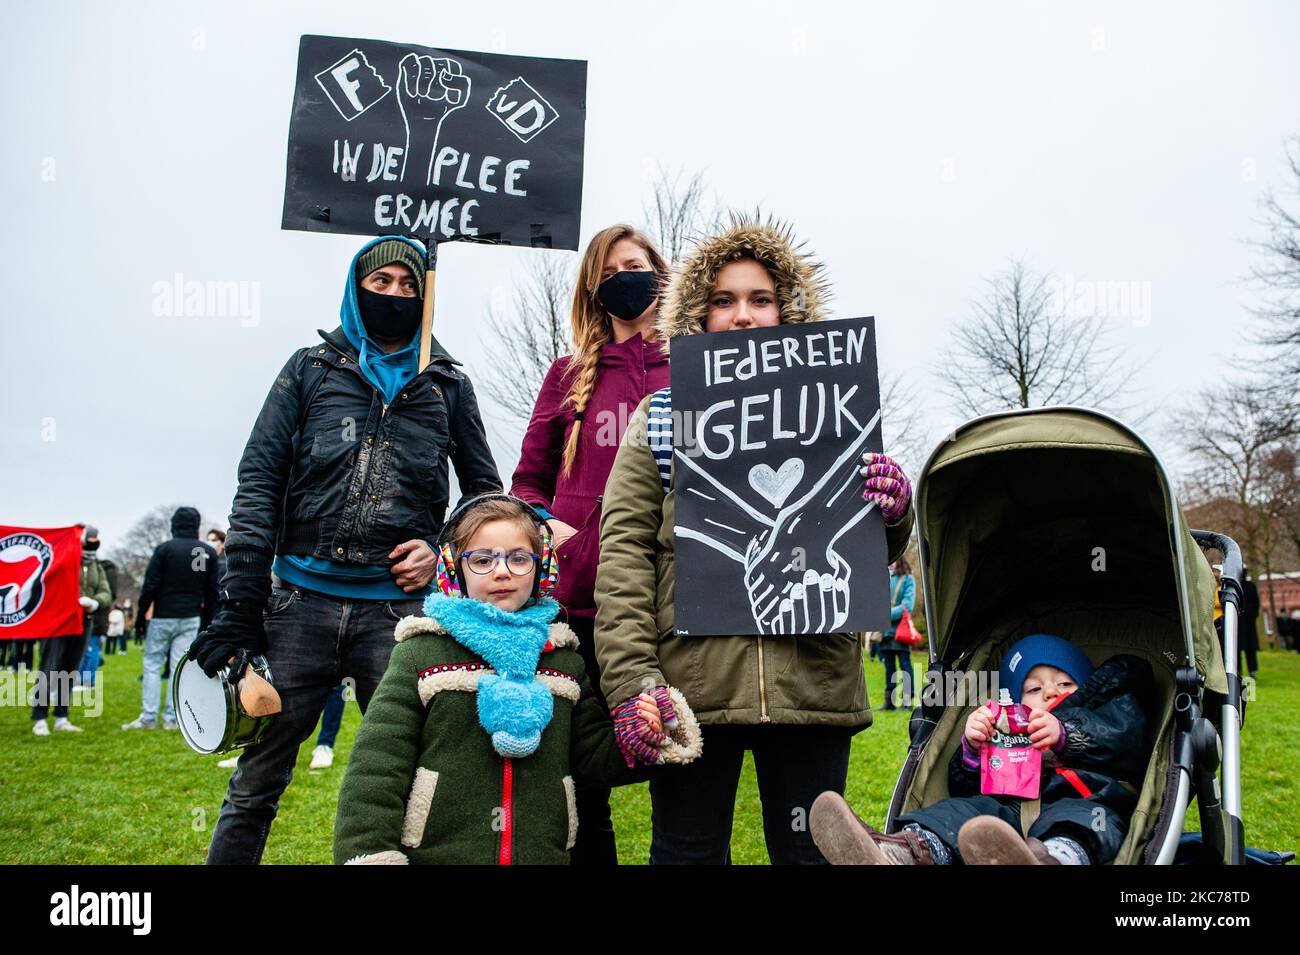 A whole family is holding placards against racism, during a demonstration against fascism in Amsterdam, Netherlands on January 10th, 2021. After the 'attempted coup' at the US Capitol building that left five people dead, several organizations in Amsterdam organized a demonstration against fascism. Hundreds of people gathered at the Westerpark to protest against the rise of the far-right movement in Europe and in the USA. (Photo by Romy Arroyo Fernandez/NurPhoto) Stock Photo